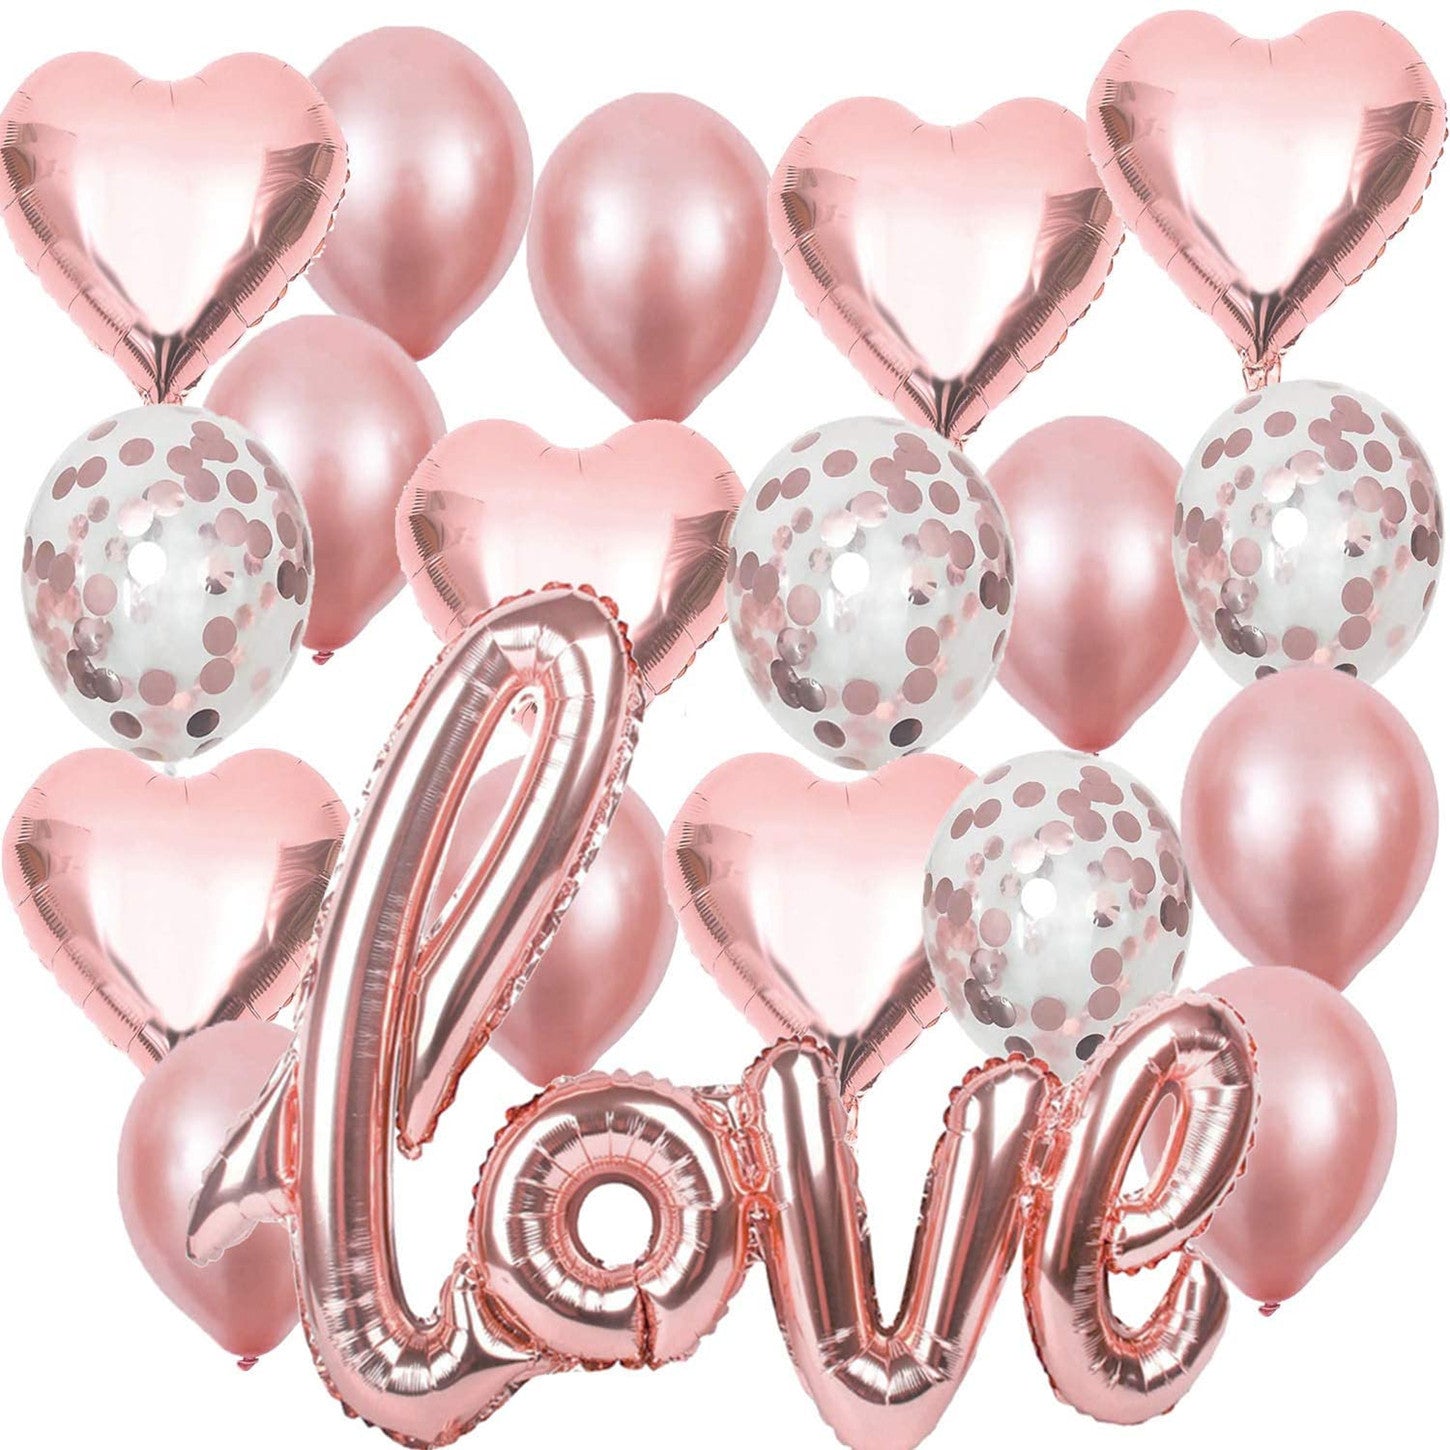 Kate LOVE Balloon Set Valentine's Day Party Wedding Venue Layout Photo Props